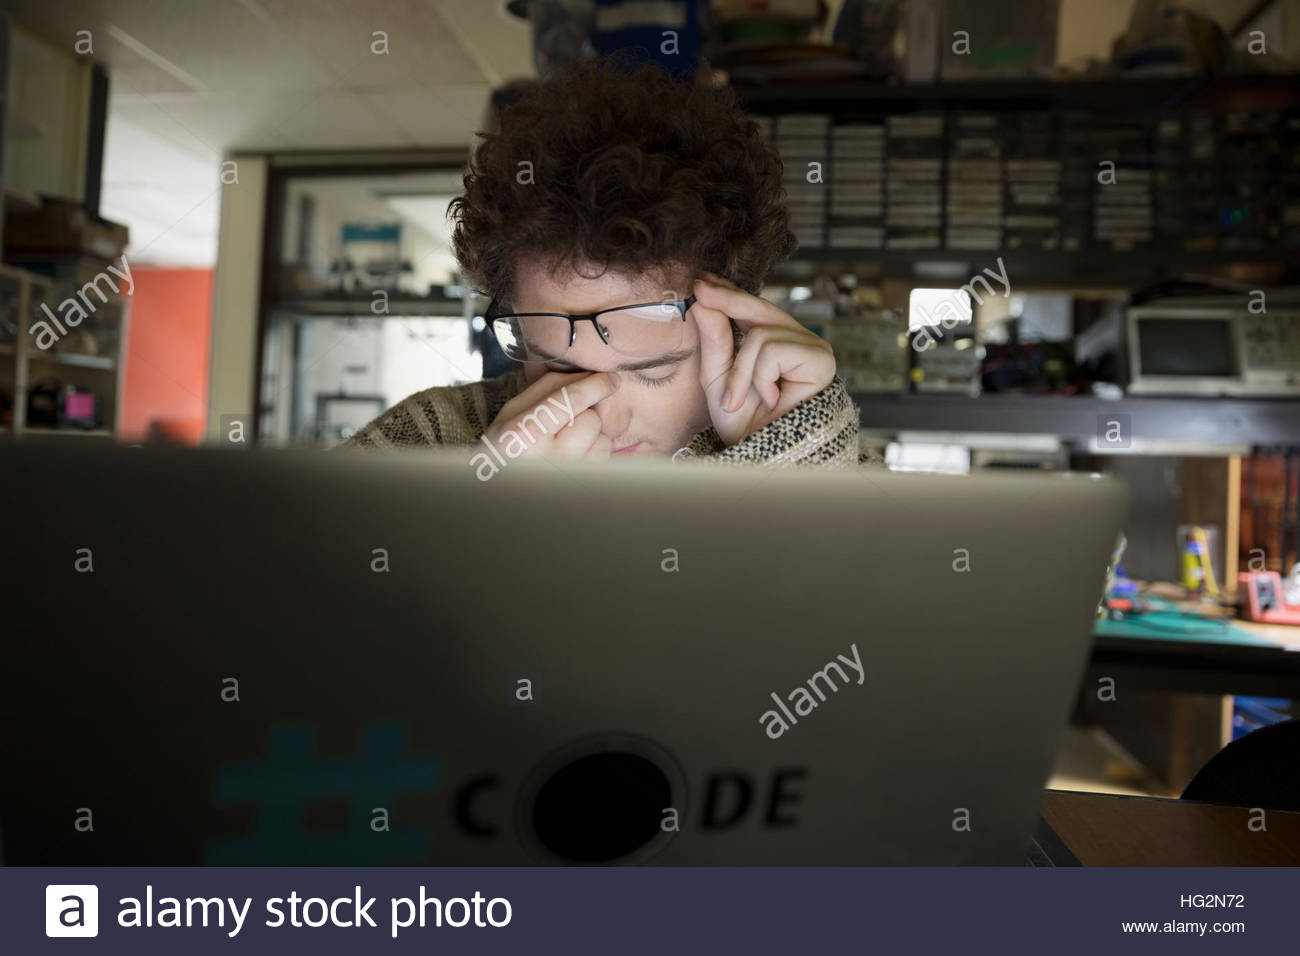 Exhausted computer programmer at laptop in dark workshop Stock Photo